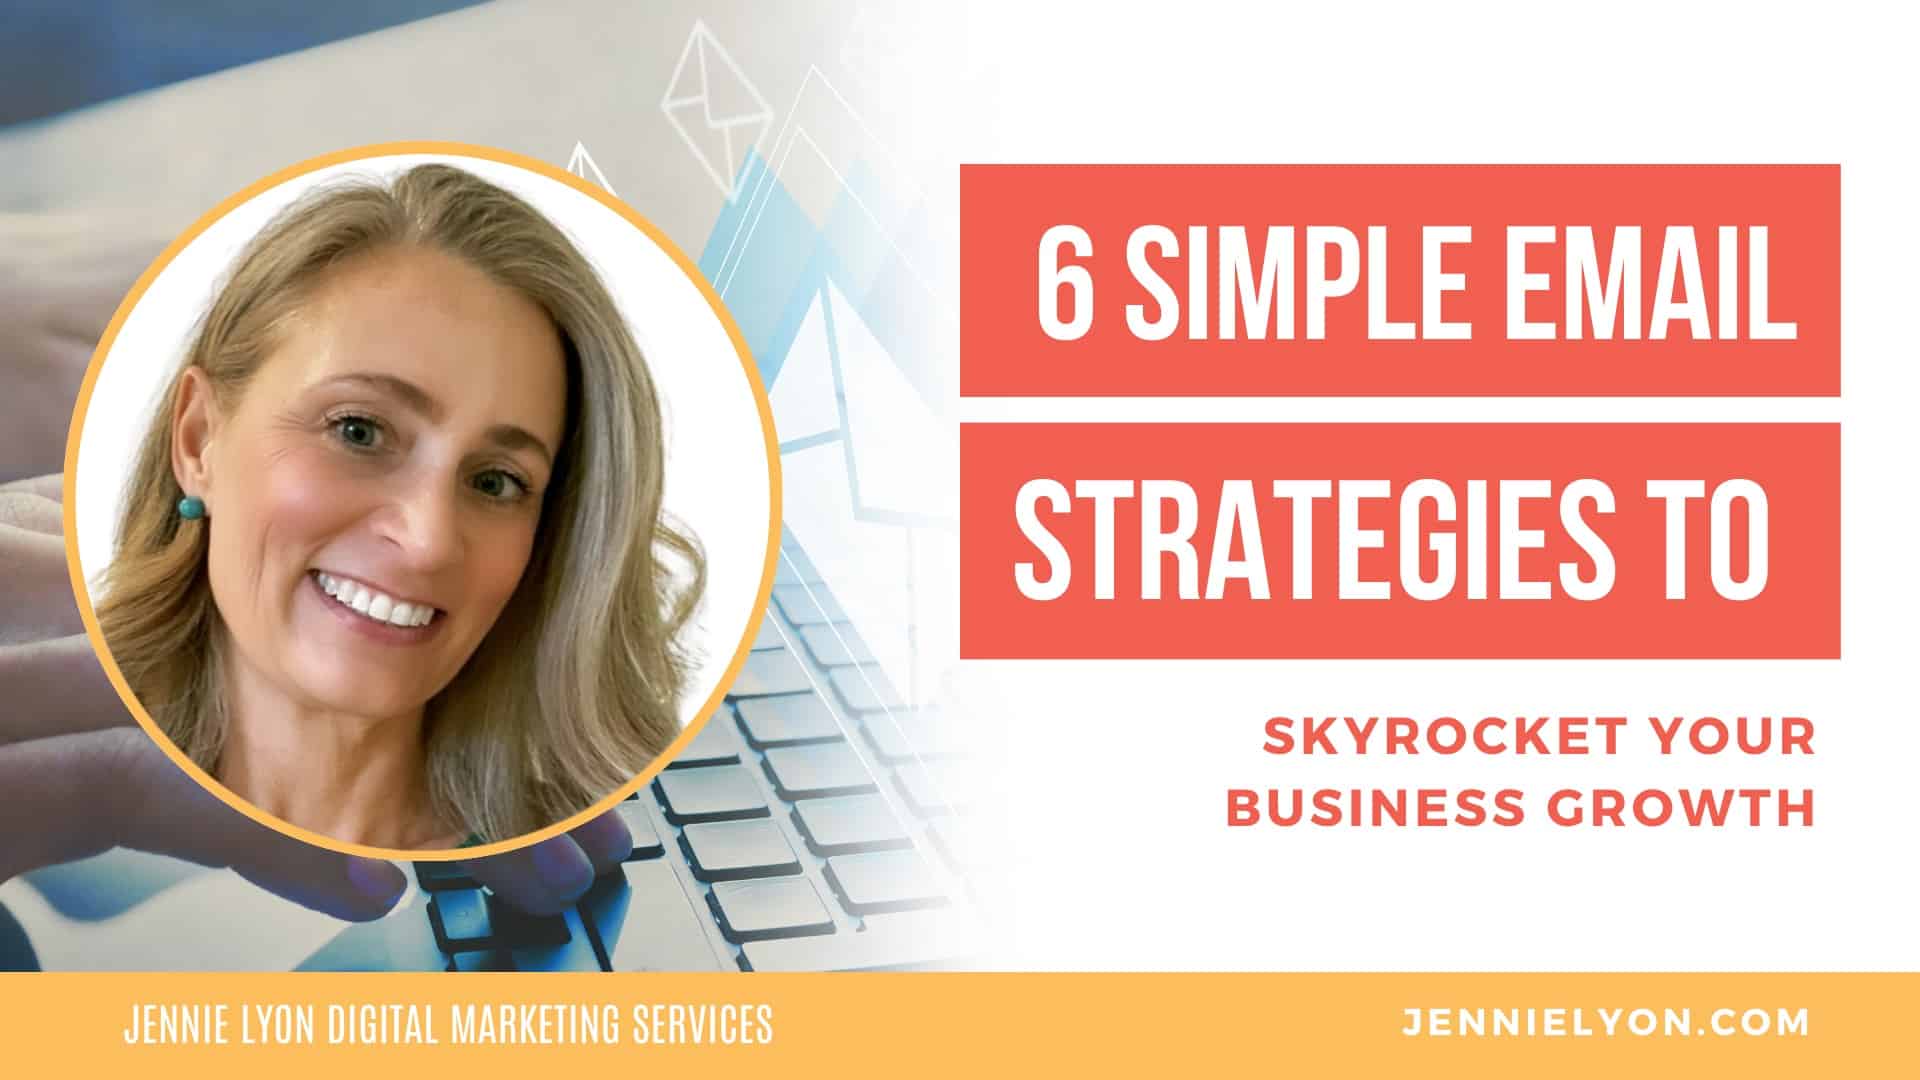 6 Simple Email Strategies To Skyrocket Your Business Growth